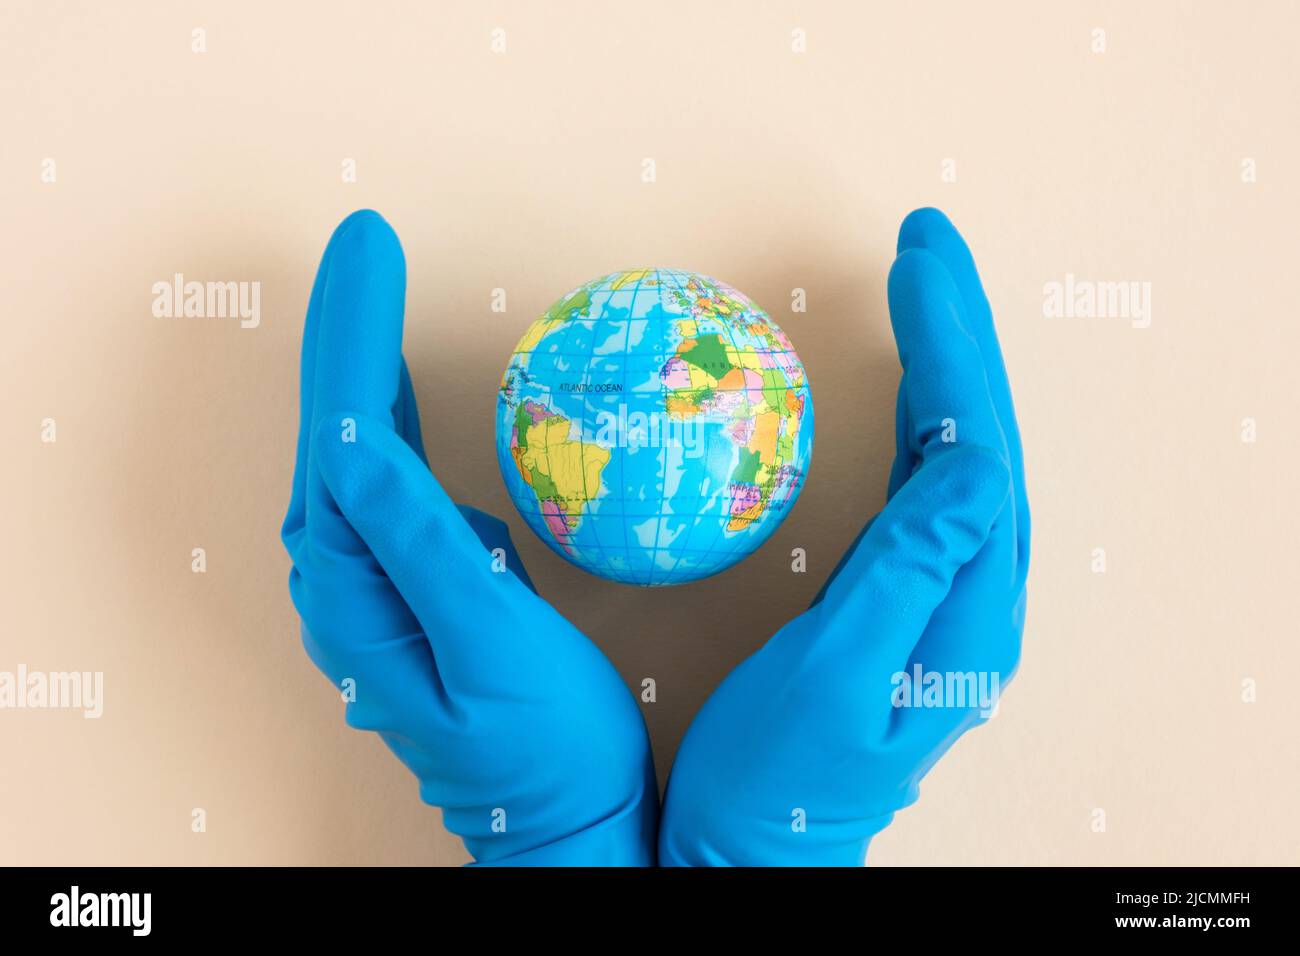 Earth globe in hands in blue protective glove on a clean. The concept of protecting nature, ecology and global peace. COVID-19 pandemic Stock Photo